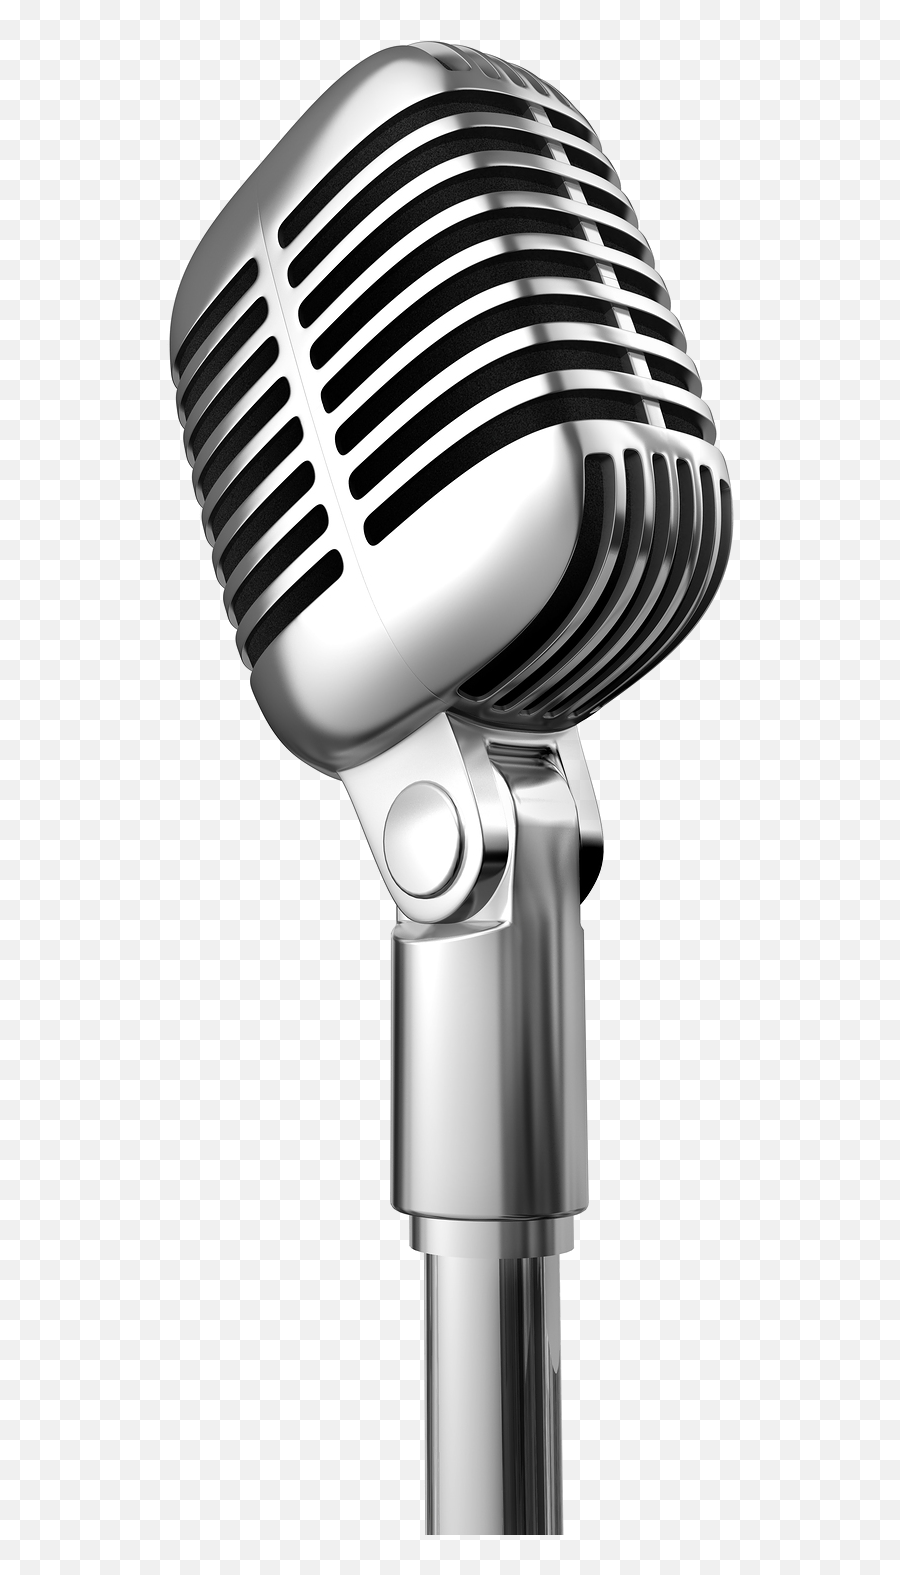 Library Of 50s Microphone Graphic - Transparent Background Microphone Png,Microphone Clipart Transparent